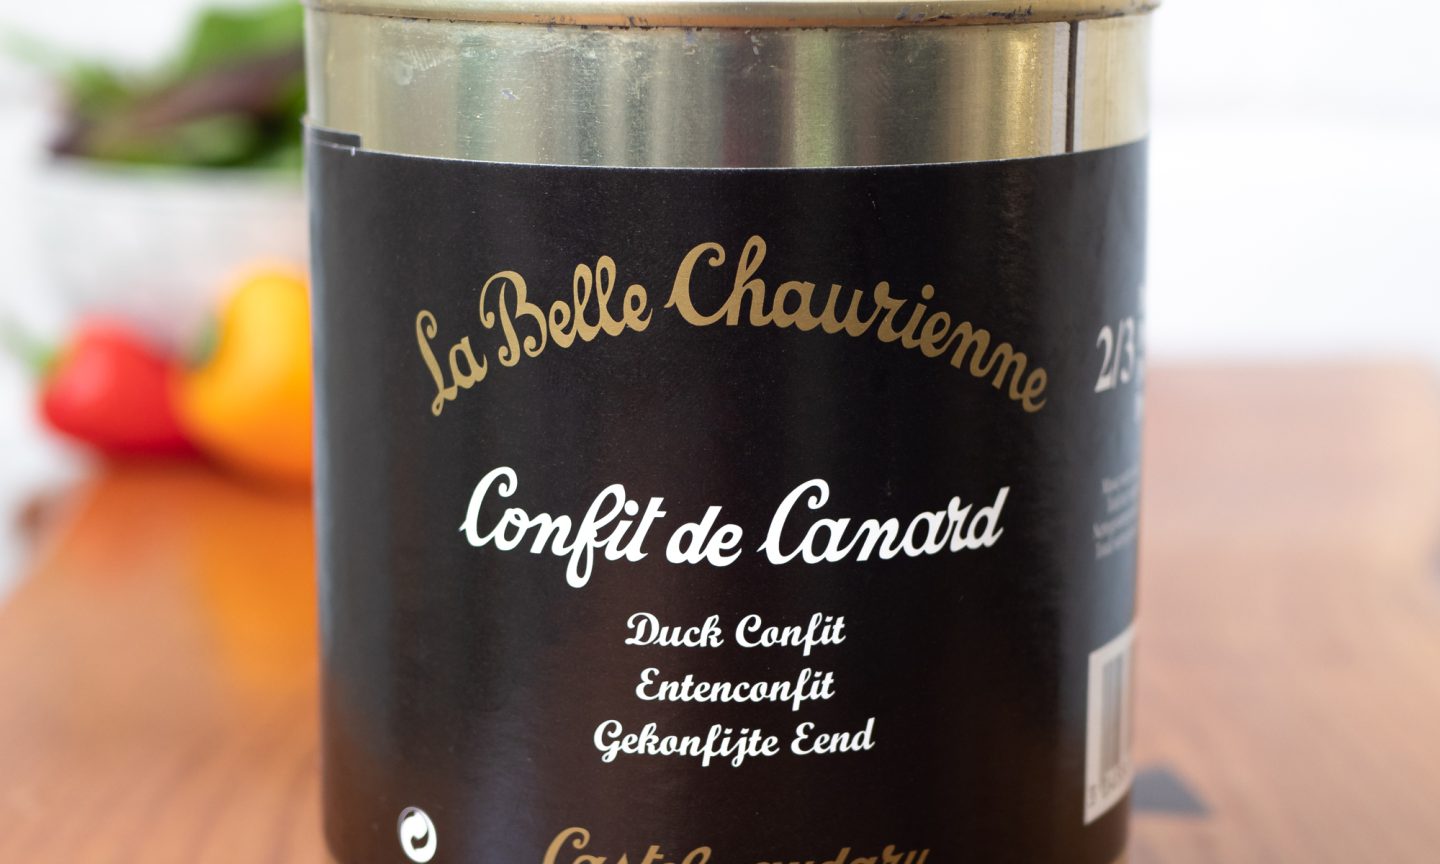 How To Prepare Duck Confit From A Tin?